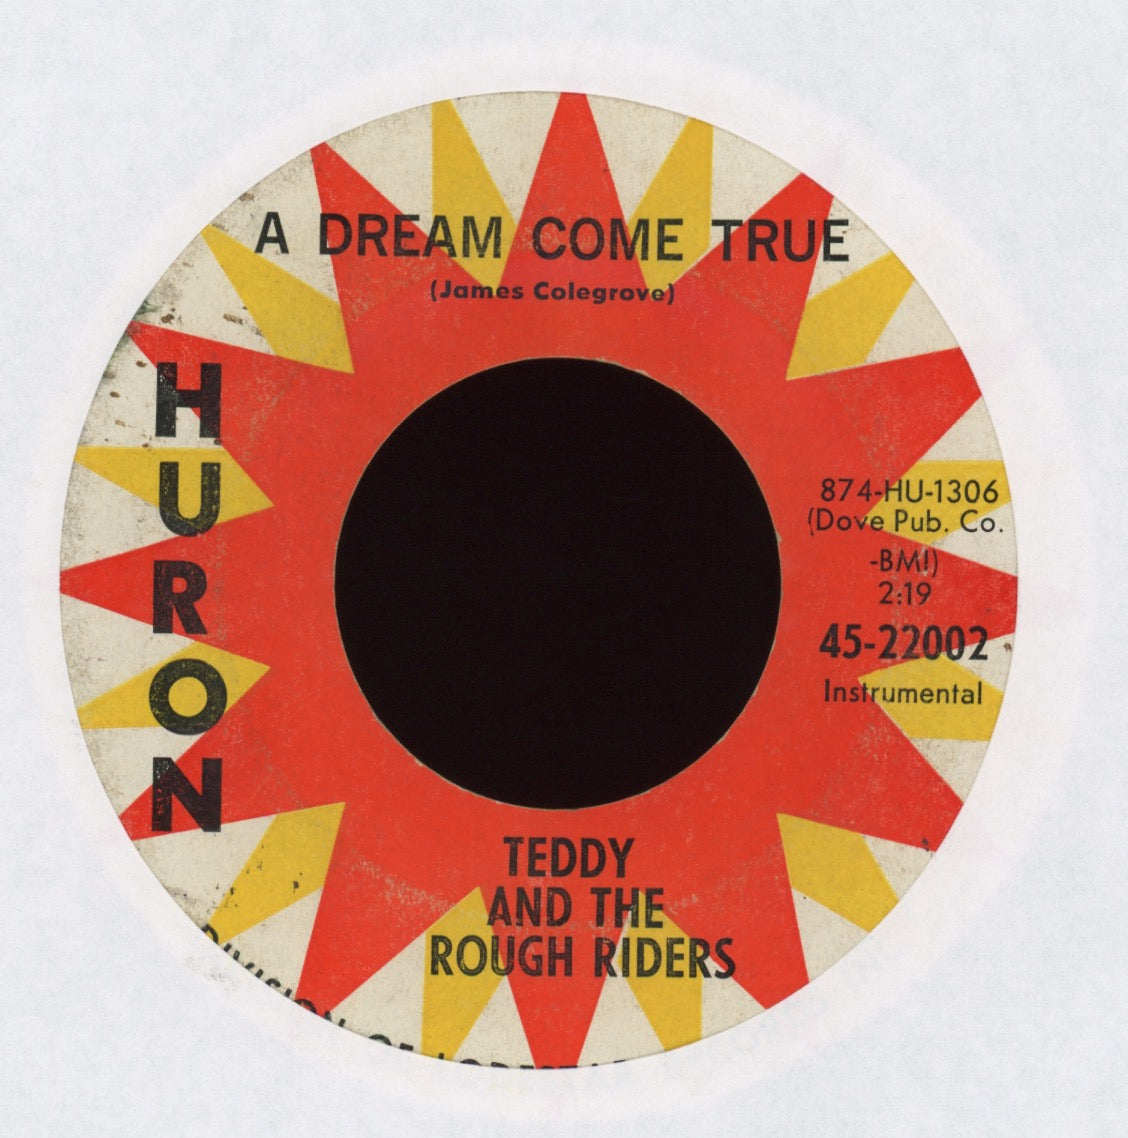 Teddy And The Rough Riders - Path Finder on Huron